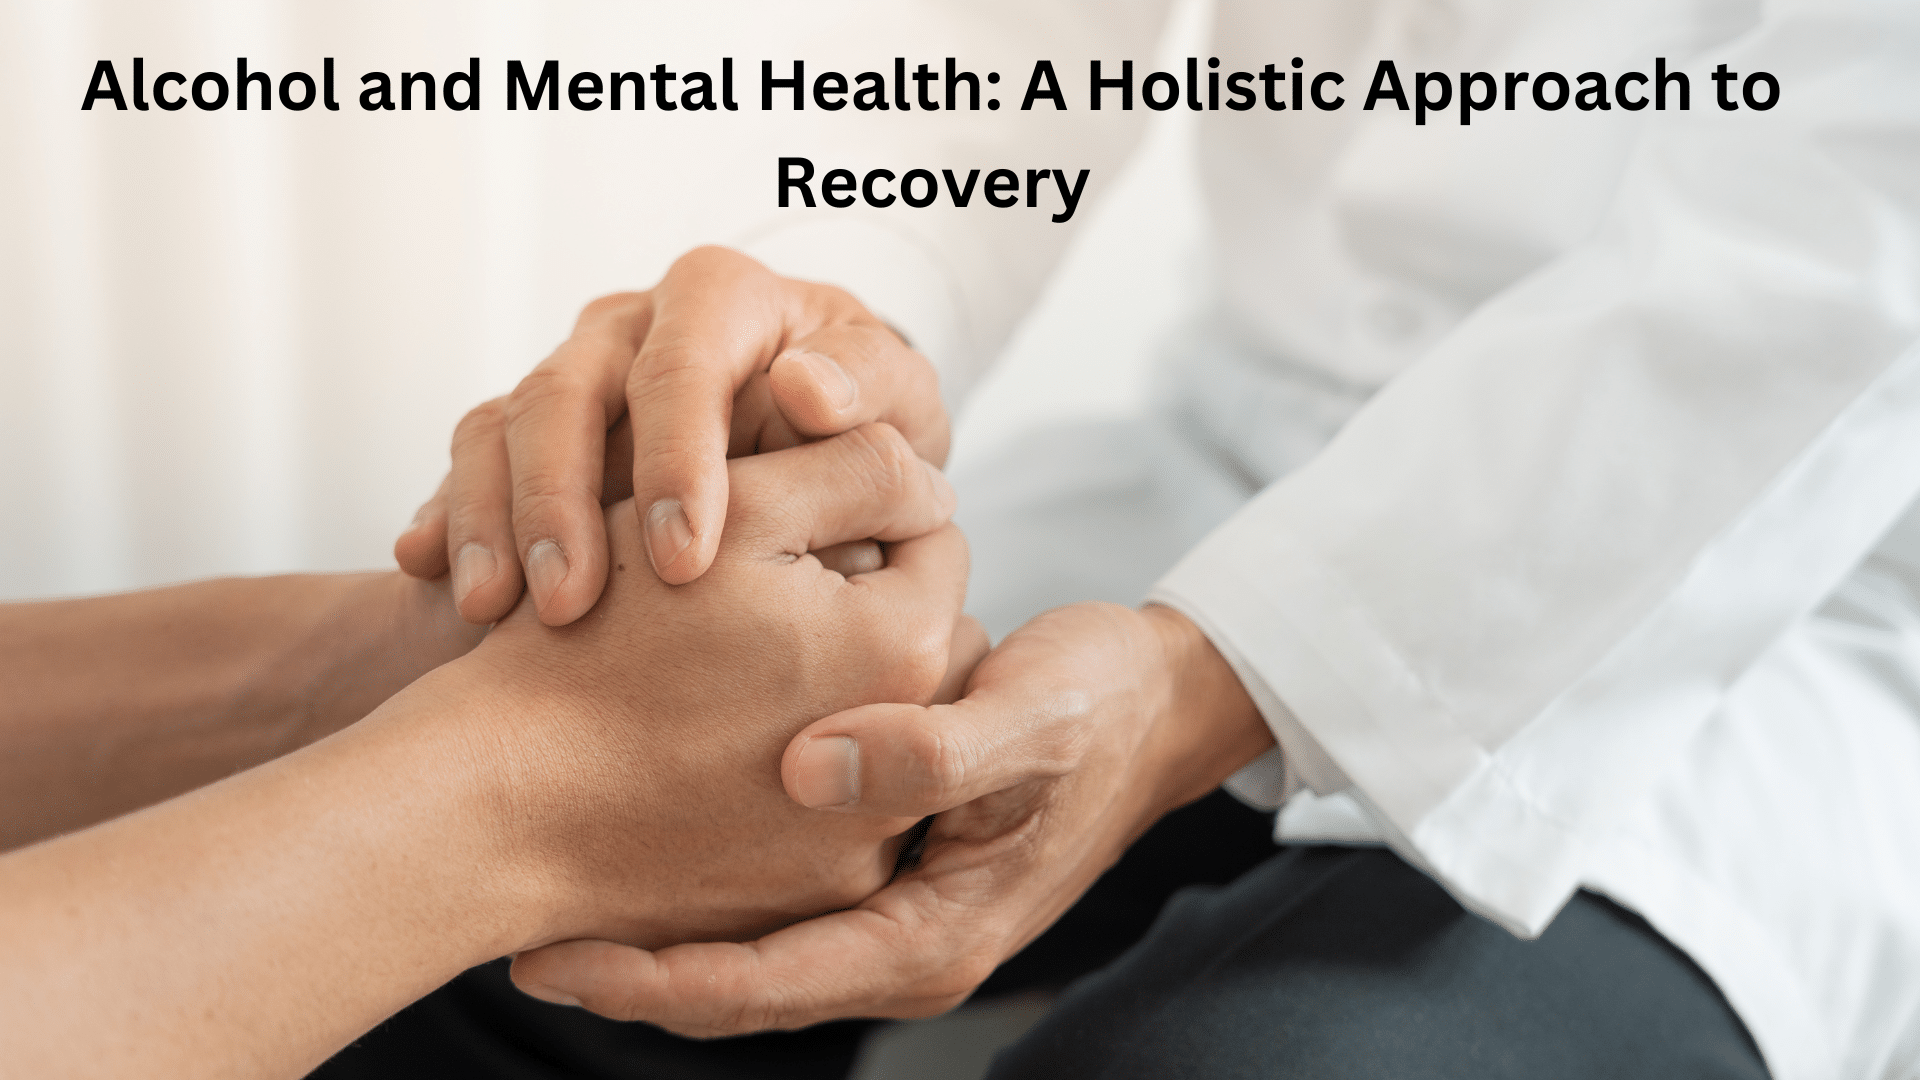 Alcohol and Mental Health: A Holistic Approach to Recovery